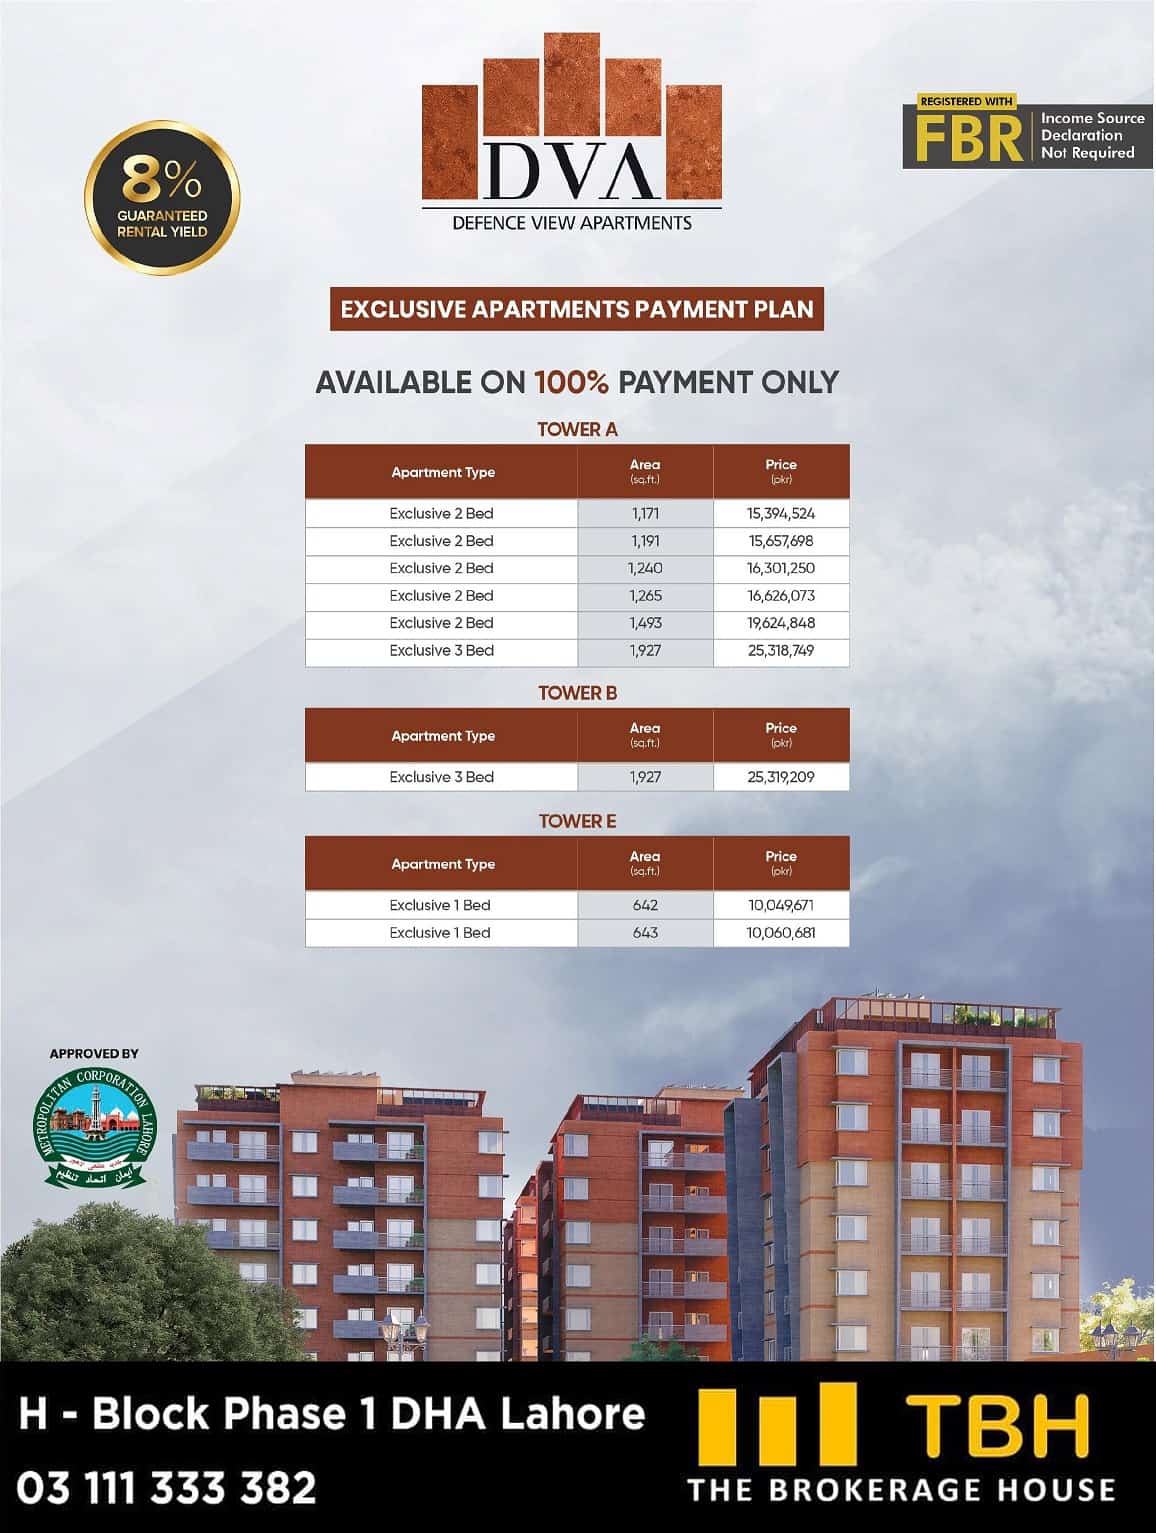 Defence View Apartments Exclusive Payment Plan